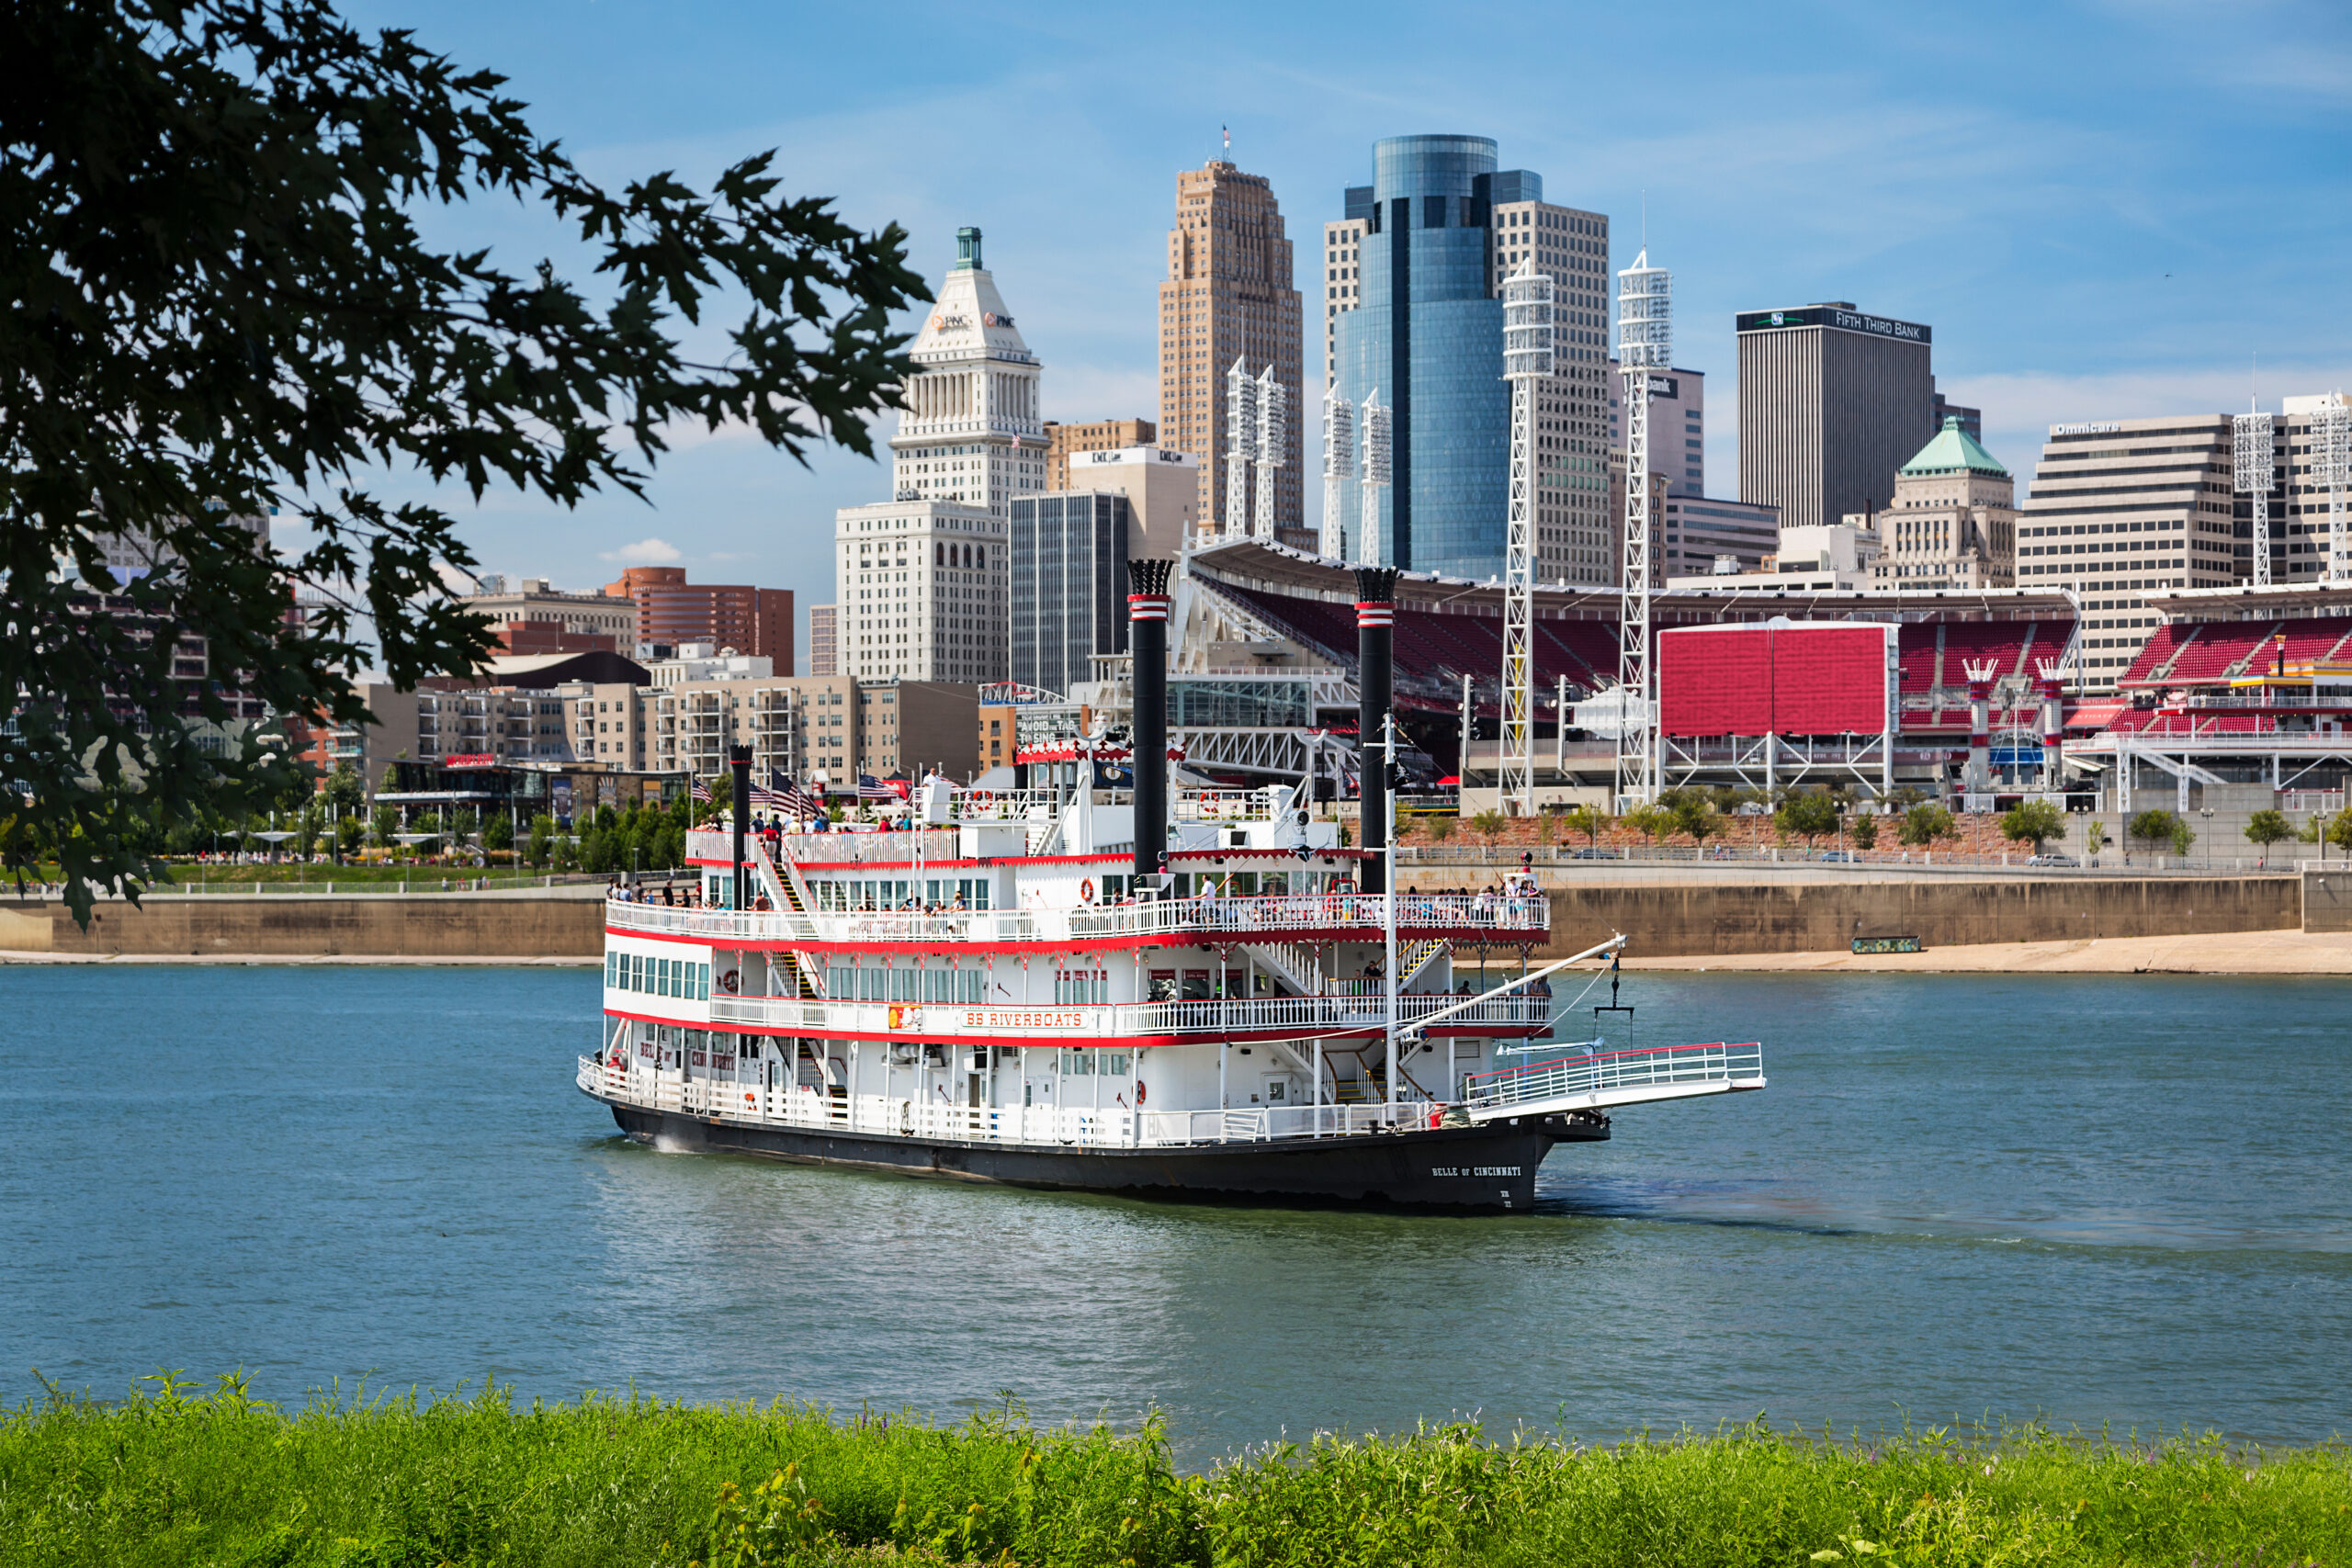 Riverboat on the Ohio River with the Cincinnati skyline in the background (Photo Credit: Cincinnati Experience)